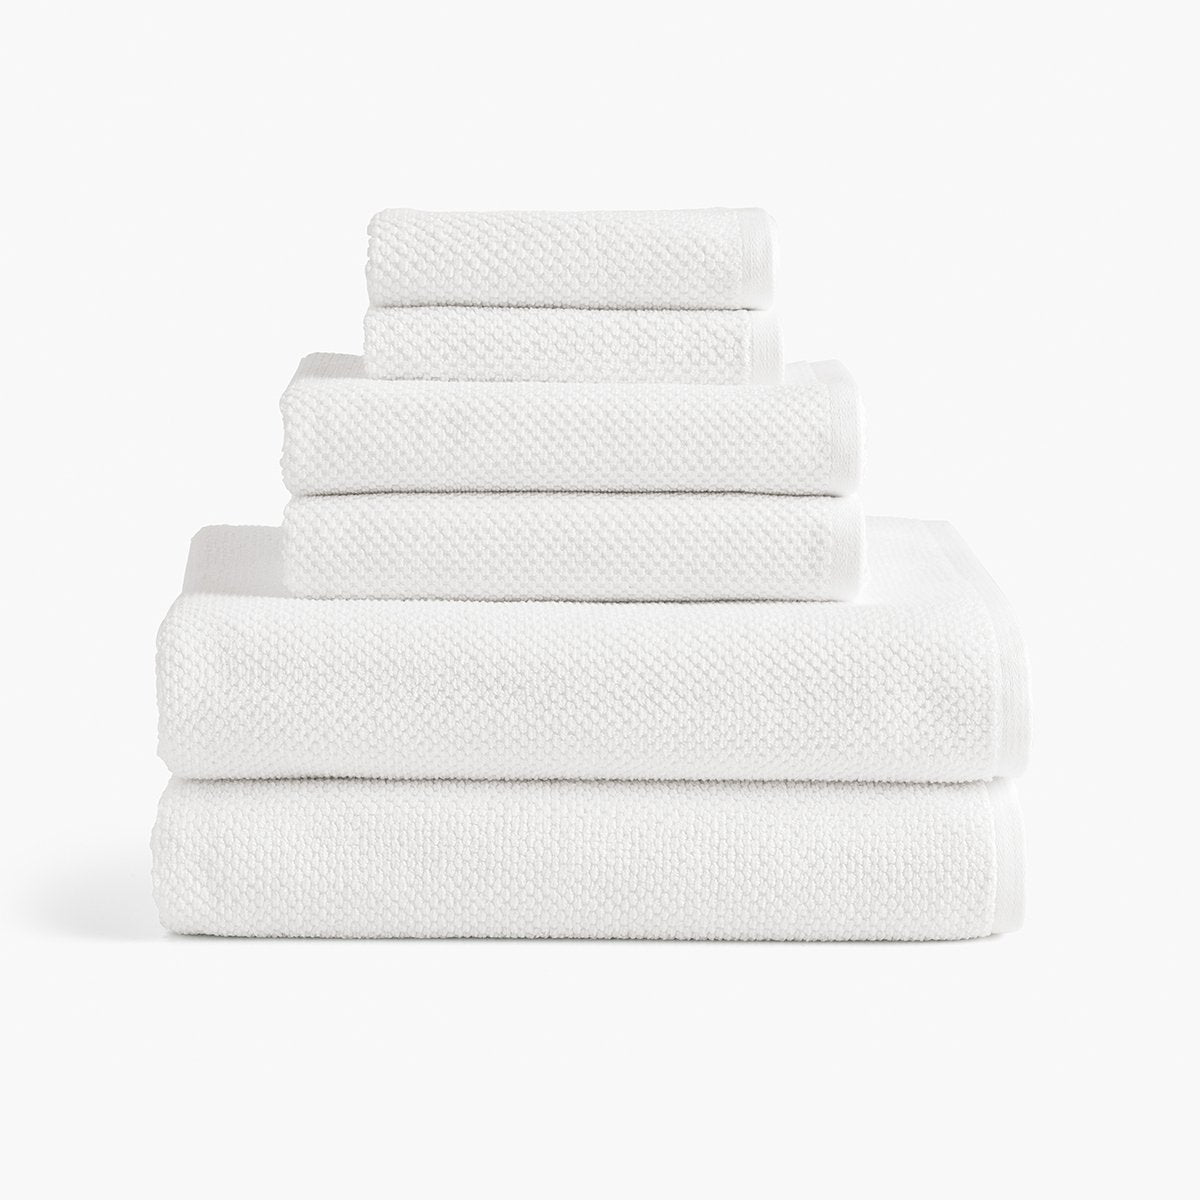 Antimicrobial Organic Cotton Bright White Bath Towels, Set of 6